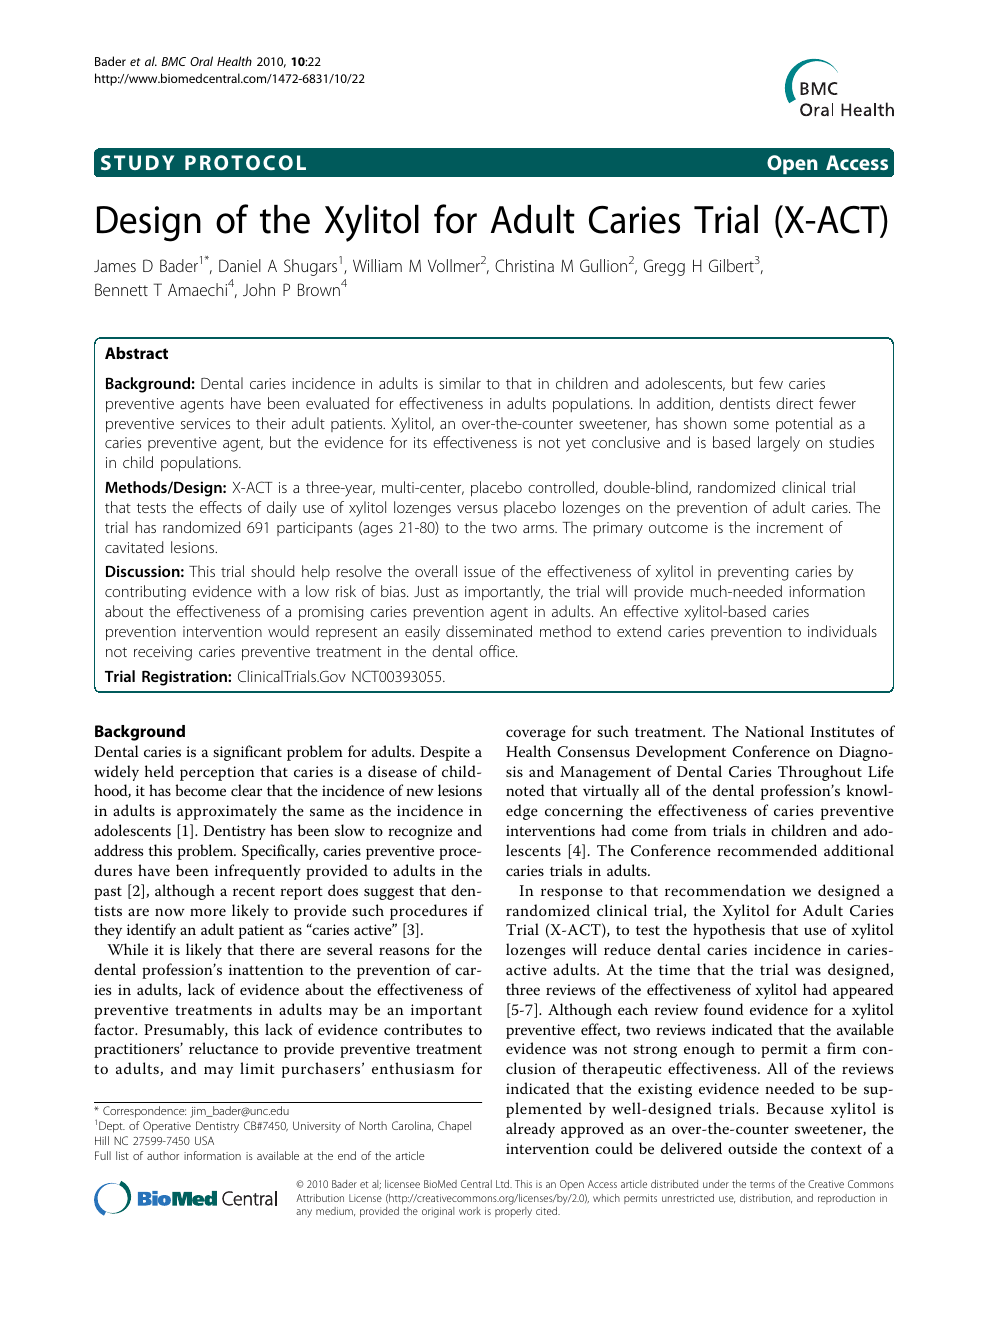 Design of the Xylitol for Adult Caries Trial (X-ACT) – topic of research  paper in Health sciences. Download scholarly article PDF and read for free  on CyberLeninka open science hub.